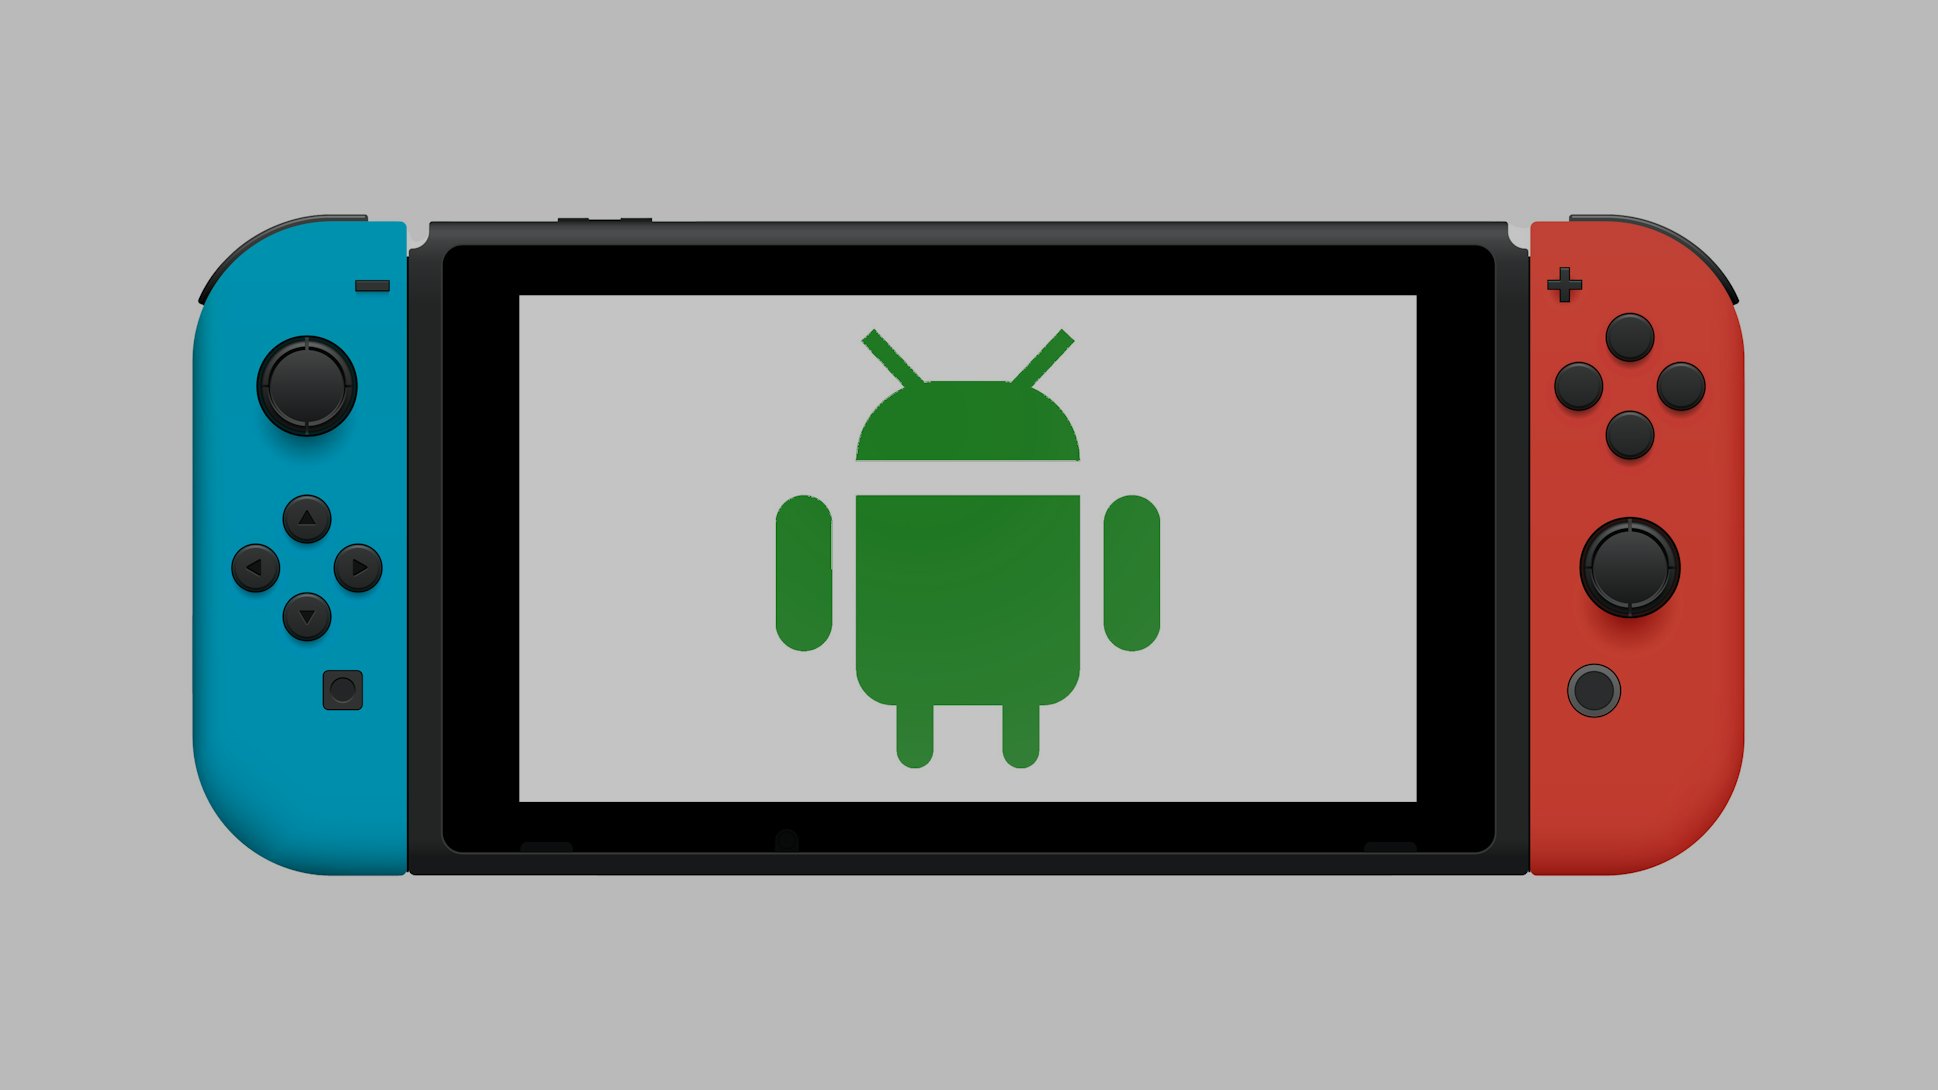 Nintendo Switch with Android logo on the screen